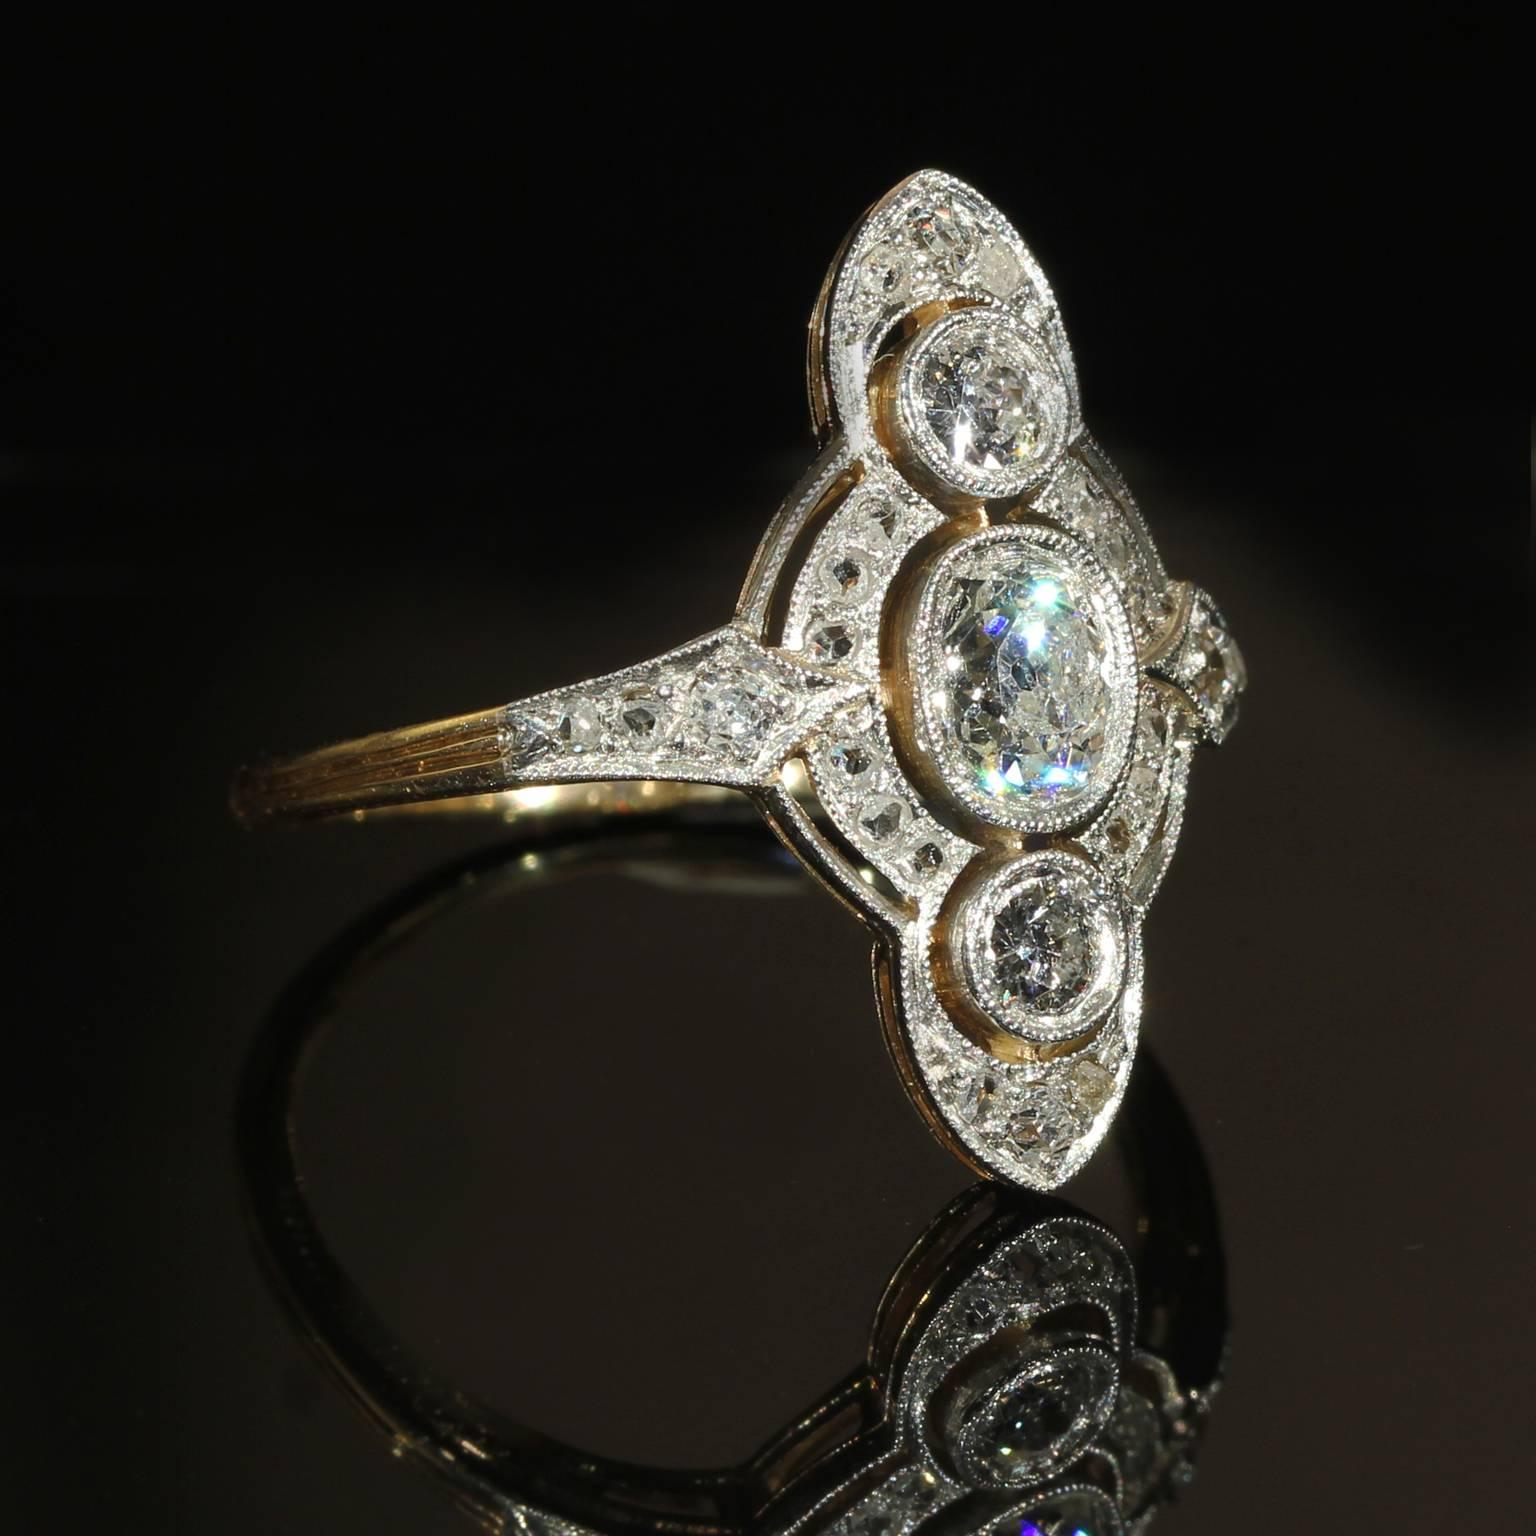 This breathtaking Edwardian era antique diamond marquis (navette) shaped ring was handcrafted around 1910. Each of the 27 white Old European cut diamonds are set in platinum, while the back and band are crafted in 14 karat yellow gold. The center